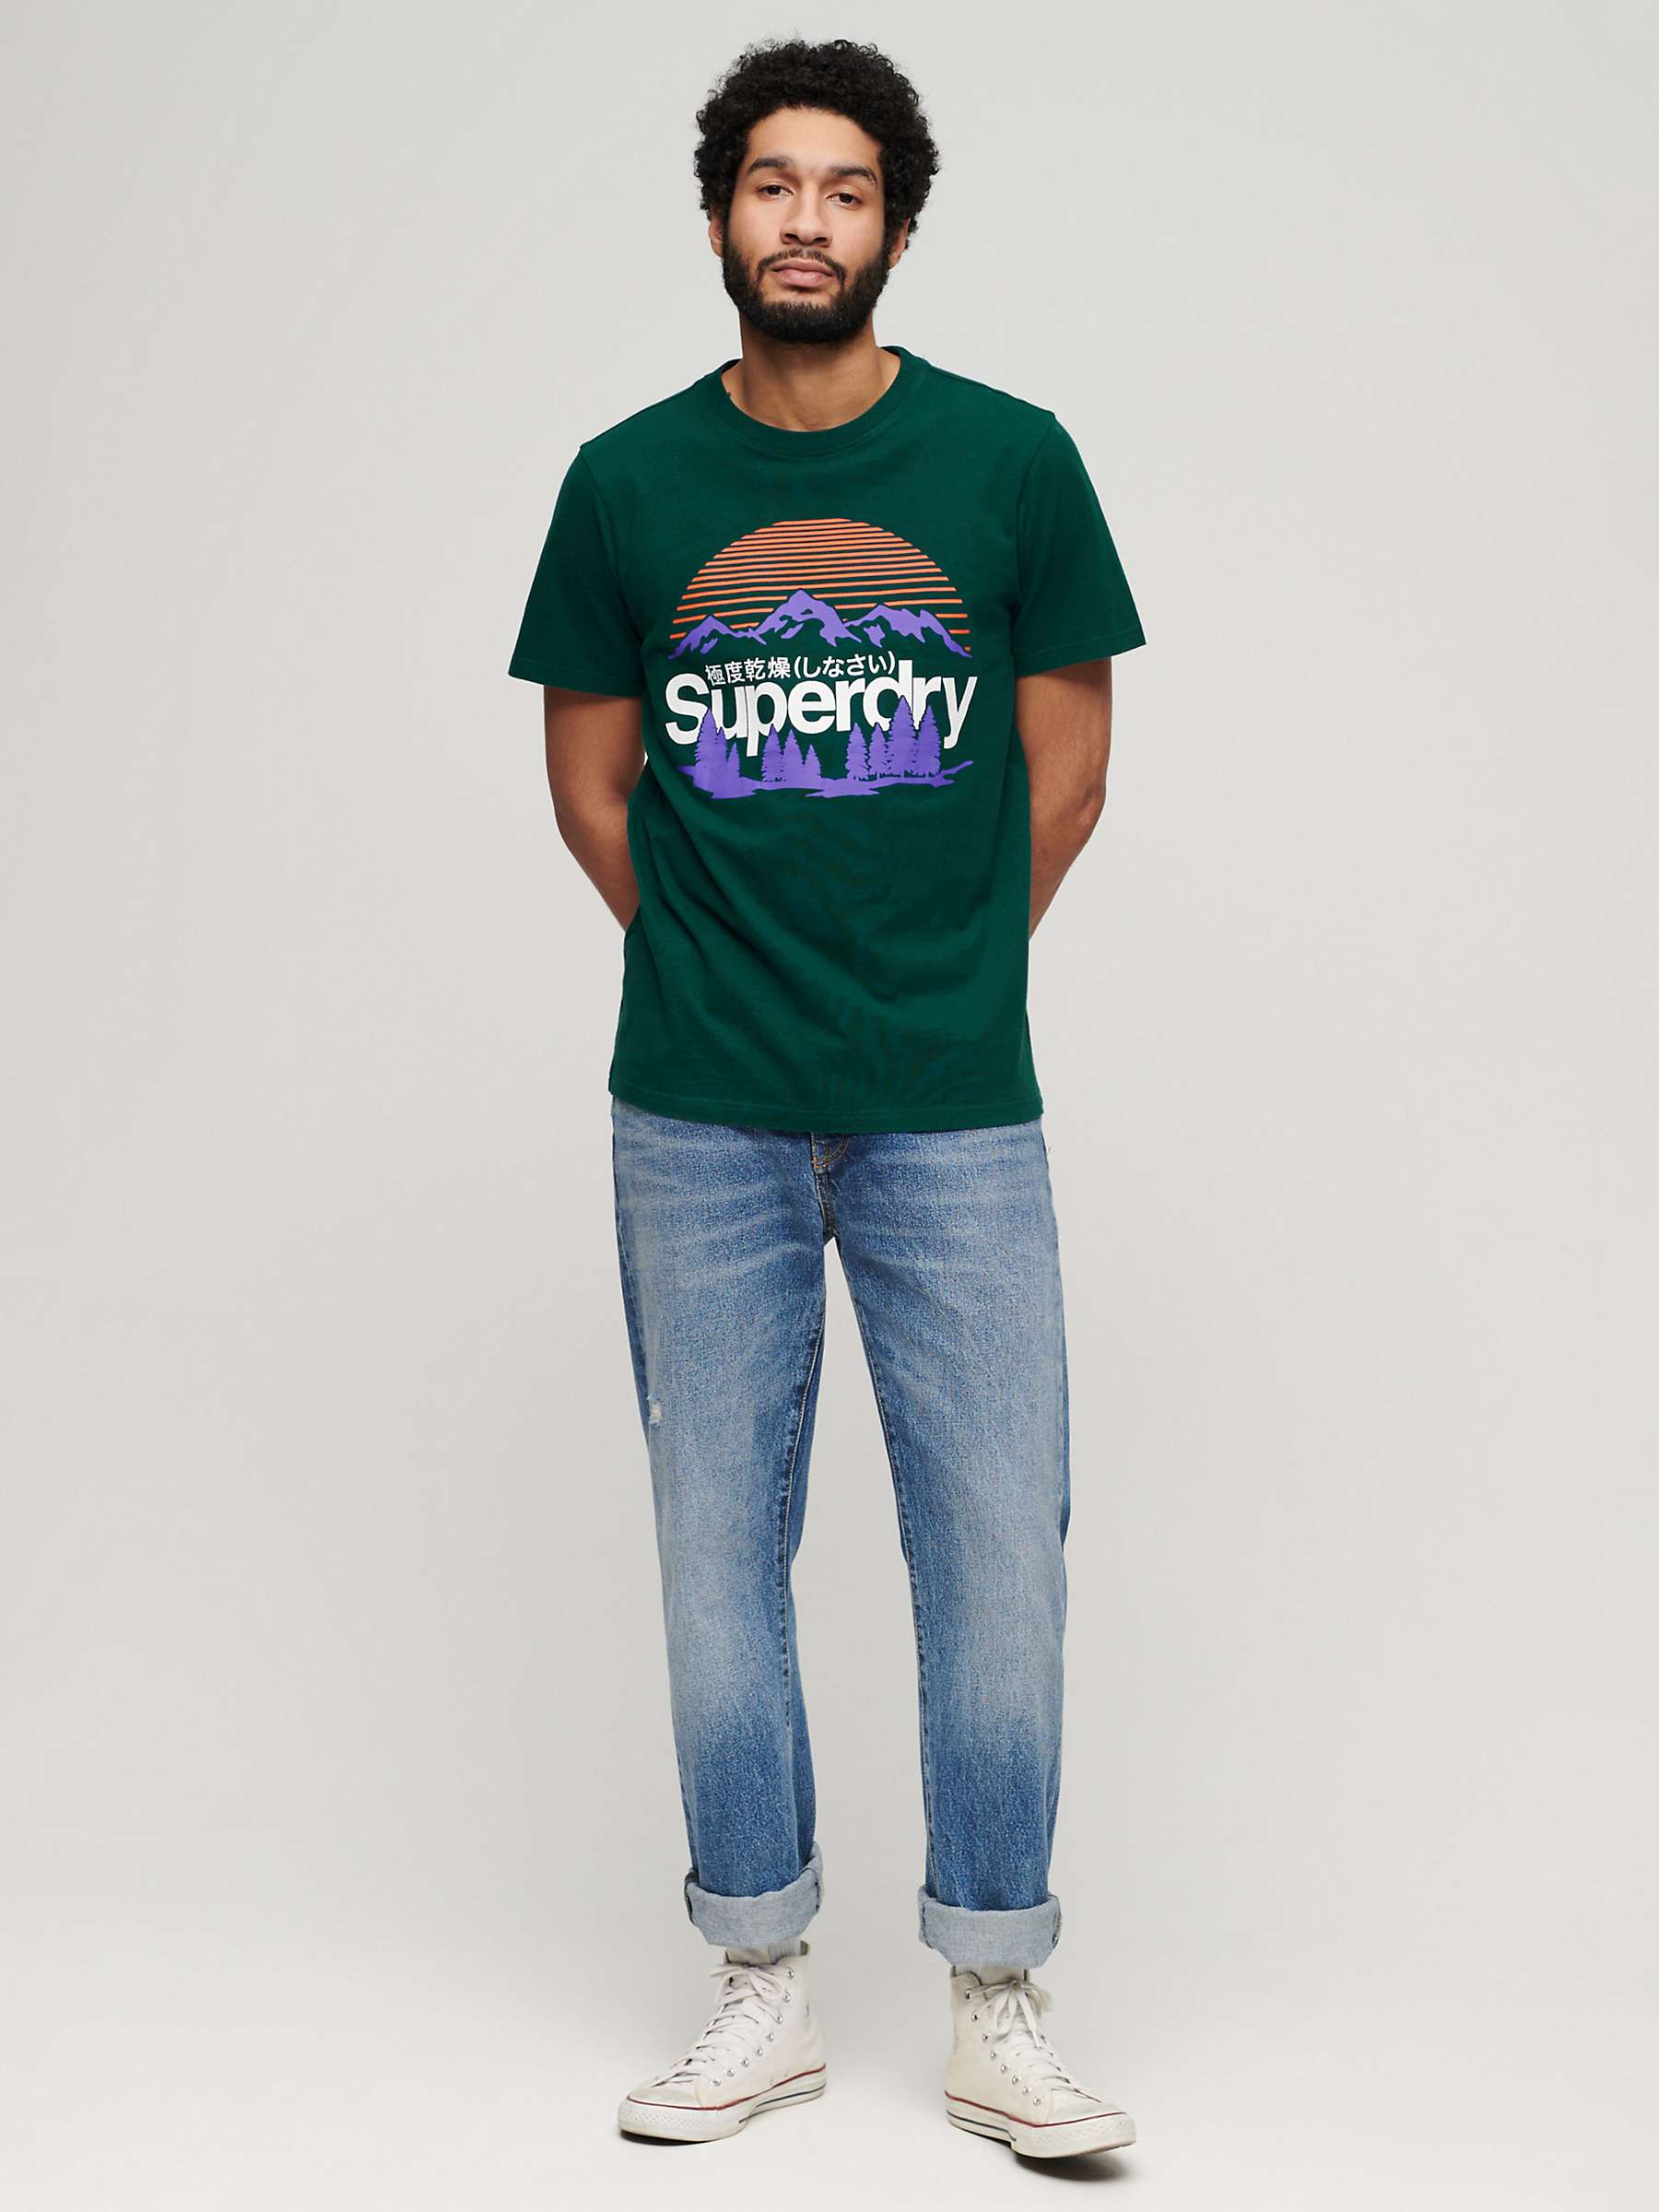 Buy Superdry Great Outdoors Logo T-Shirt Online at johnlewis.com